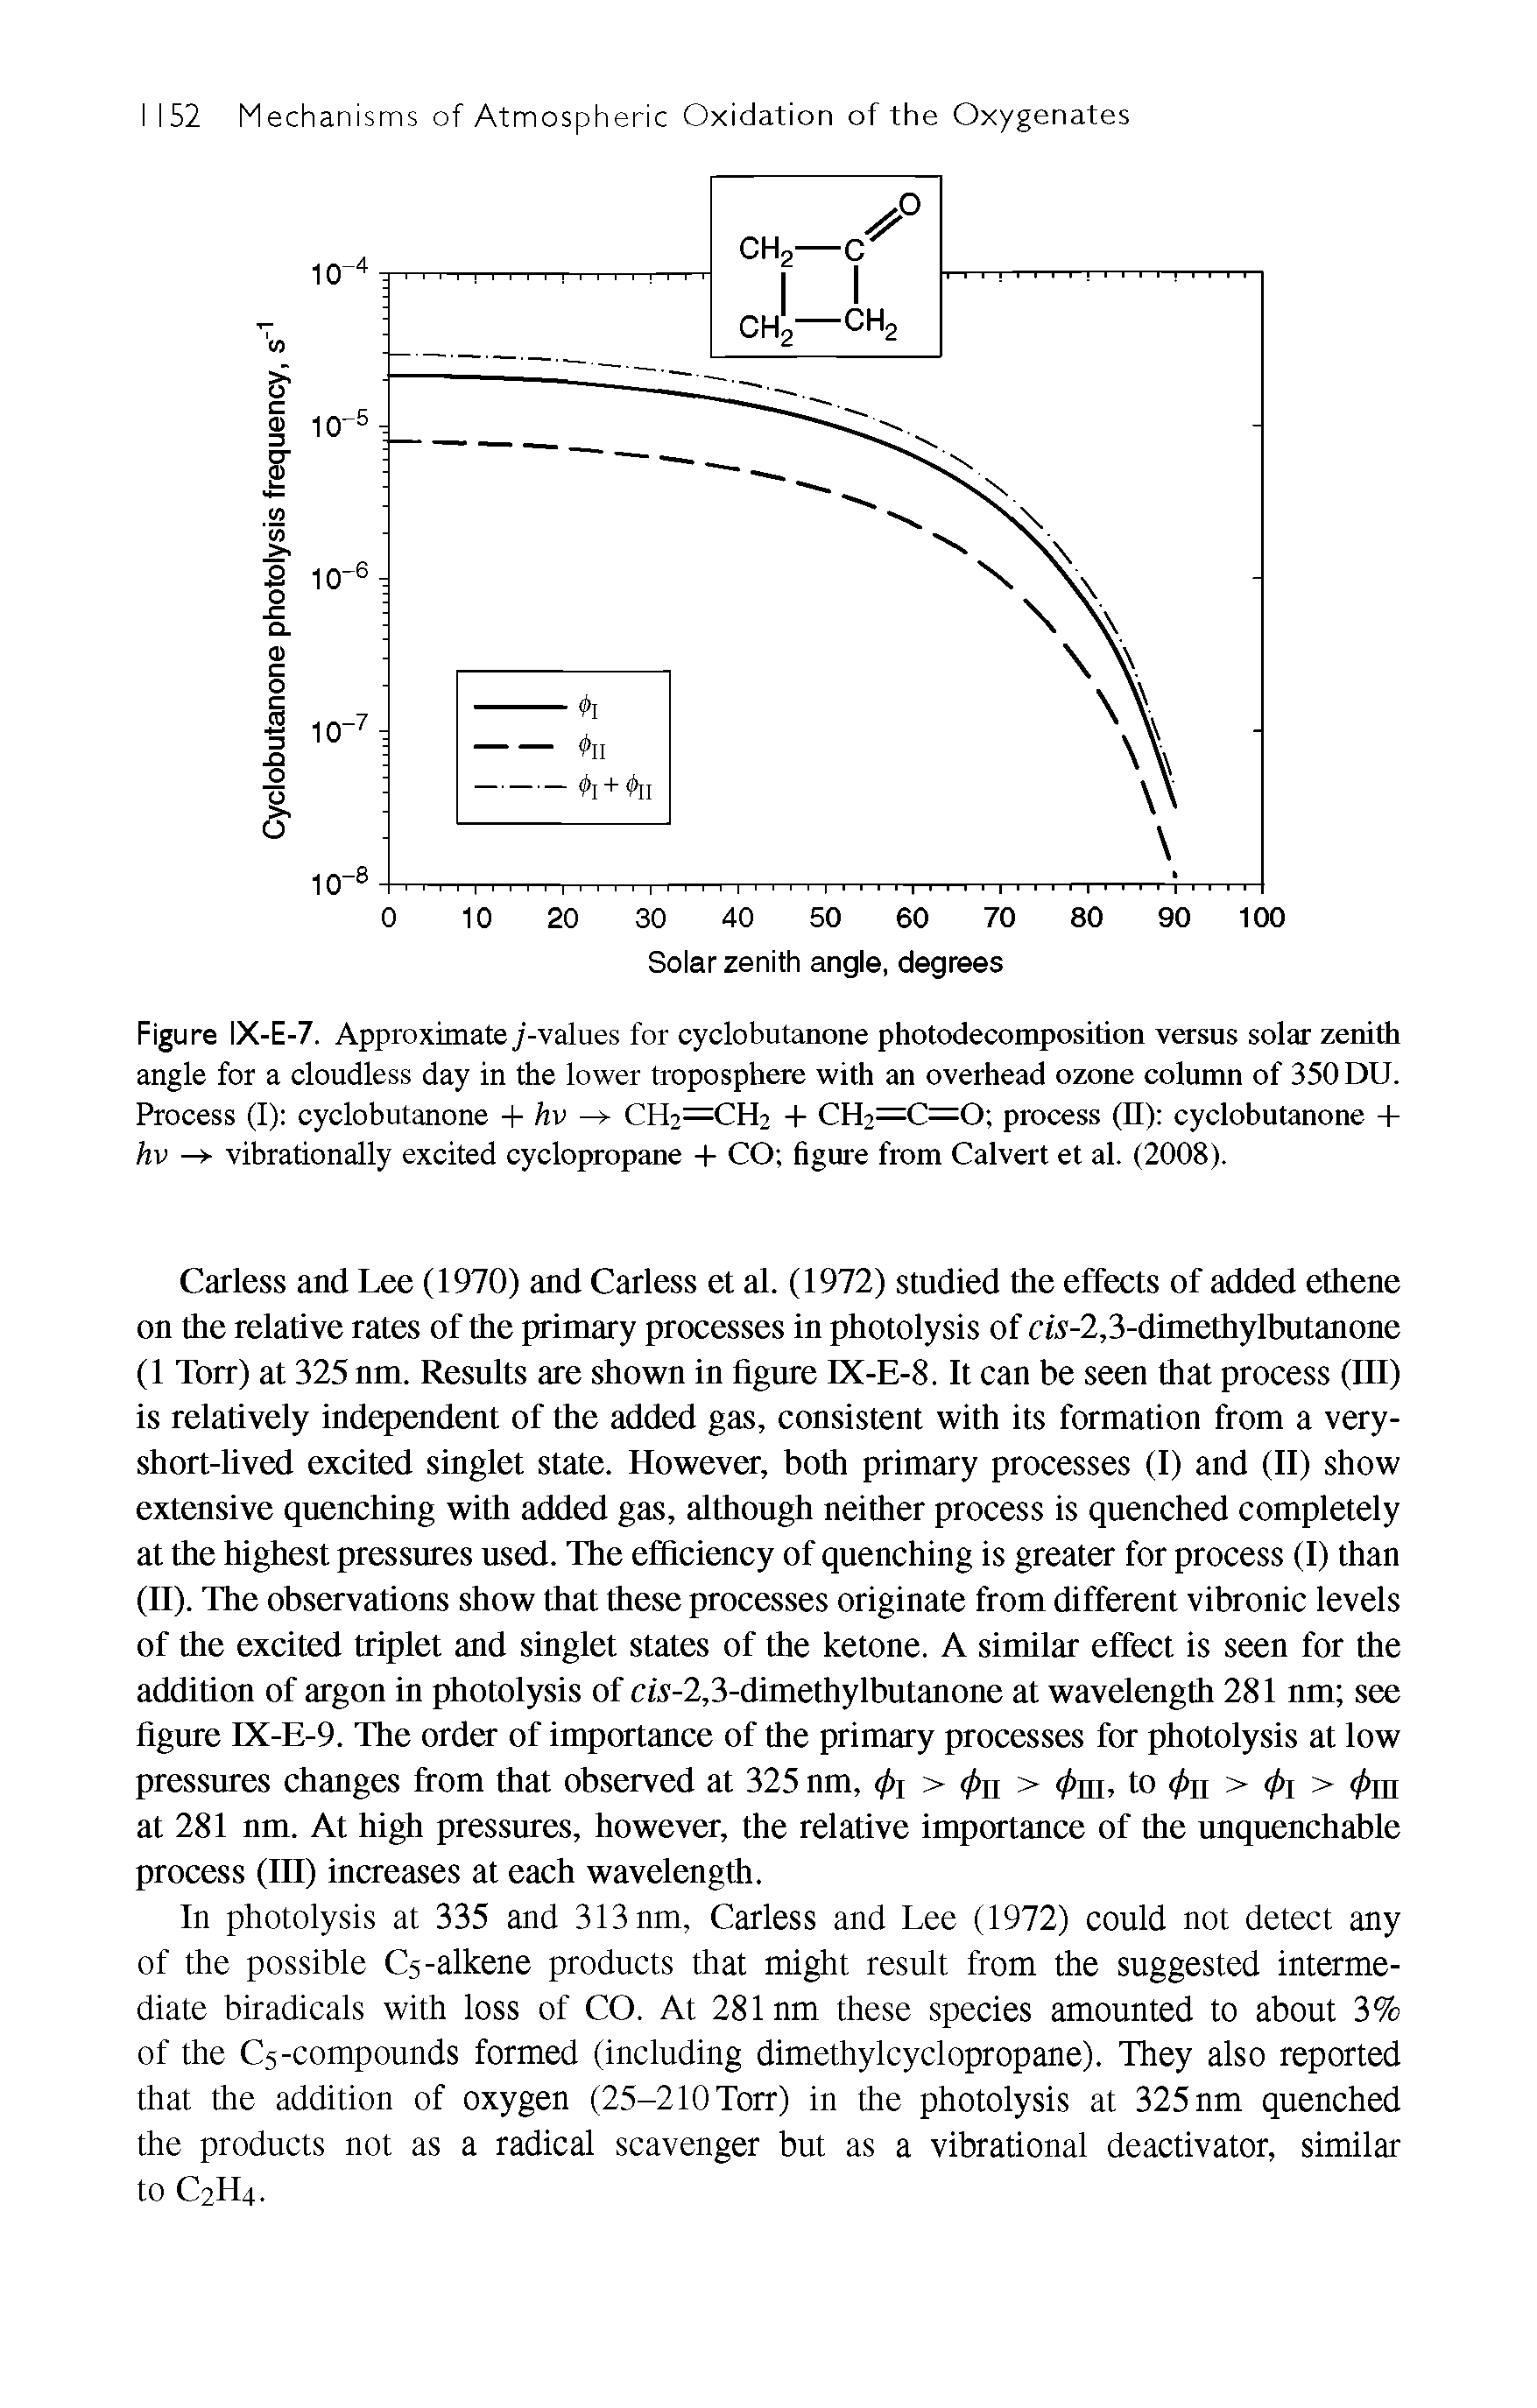 Figure IX-E-7. Approximate j-values for cyclobutanone photodecomposition versus solar zenith angle for a cloudless day in the lower troposphere with an overhead ozone column of 350 DU. Process (I) cyclobutanone + hv CH2=CH2 + CH2=C=0 process (II) cyclobutanone + hv -> vibrationally excited cyclopropane + CO figure from Calvert et al. (2008).